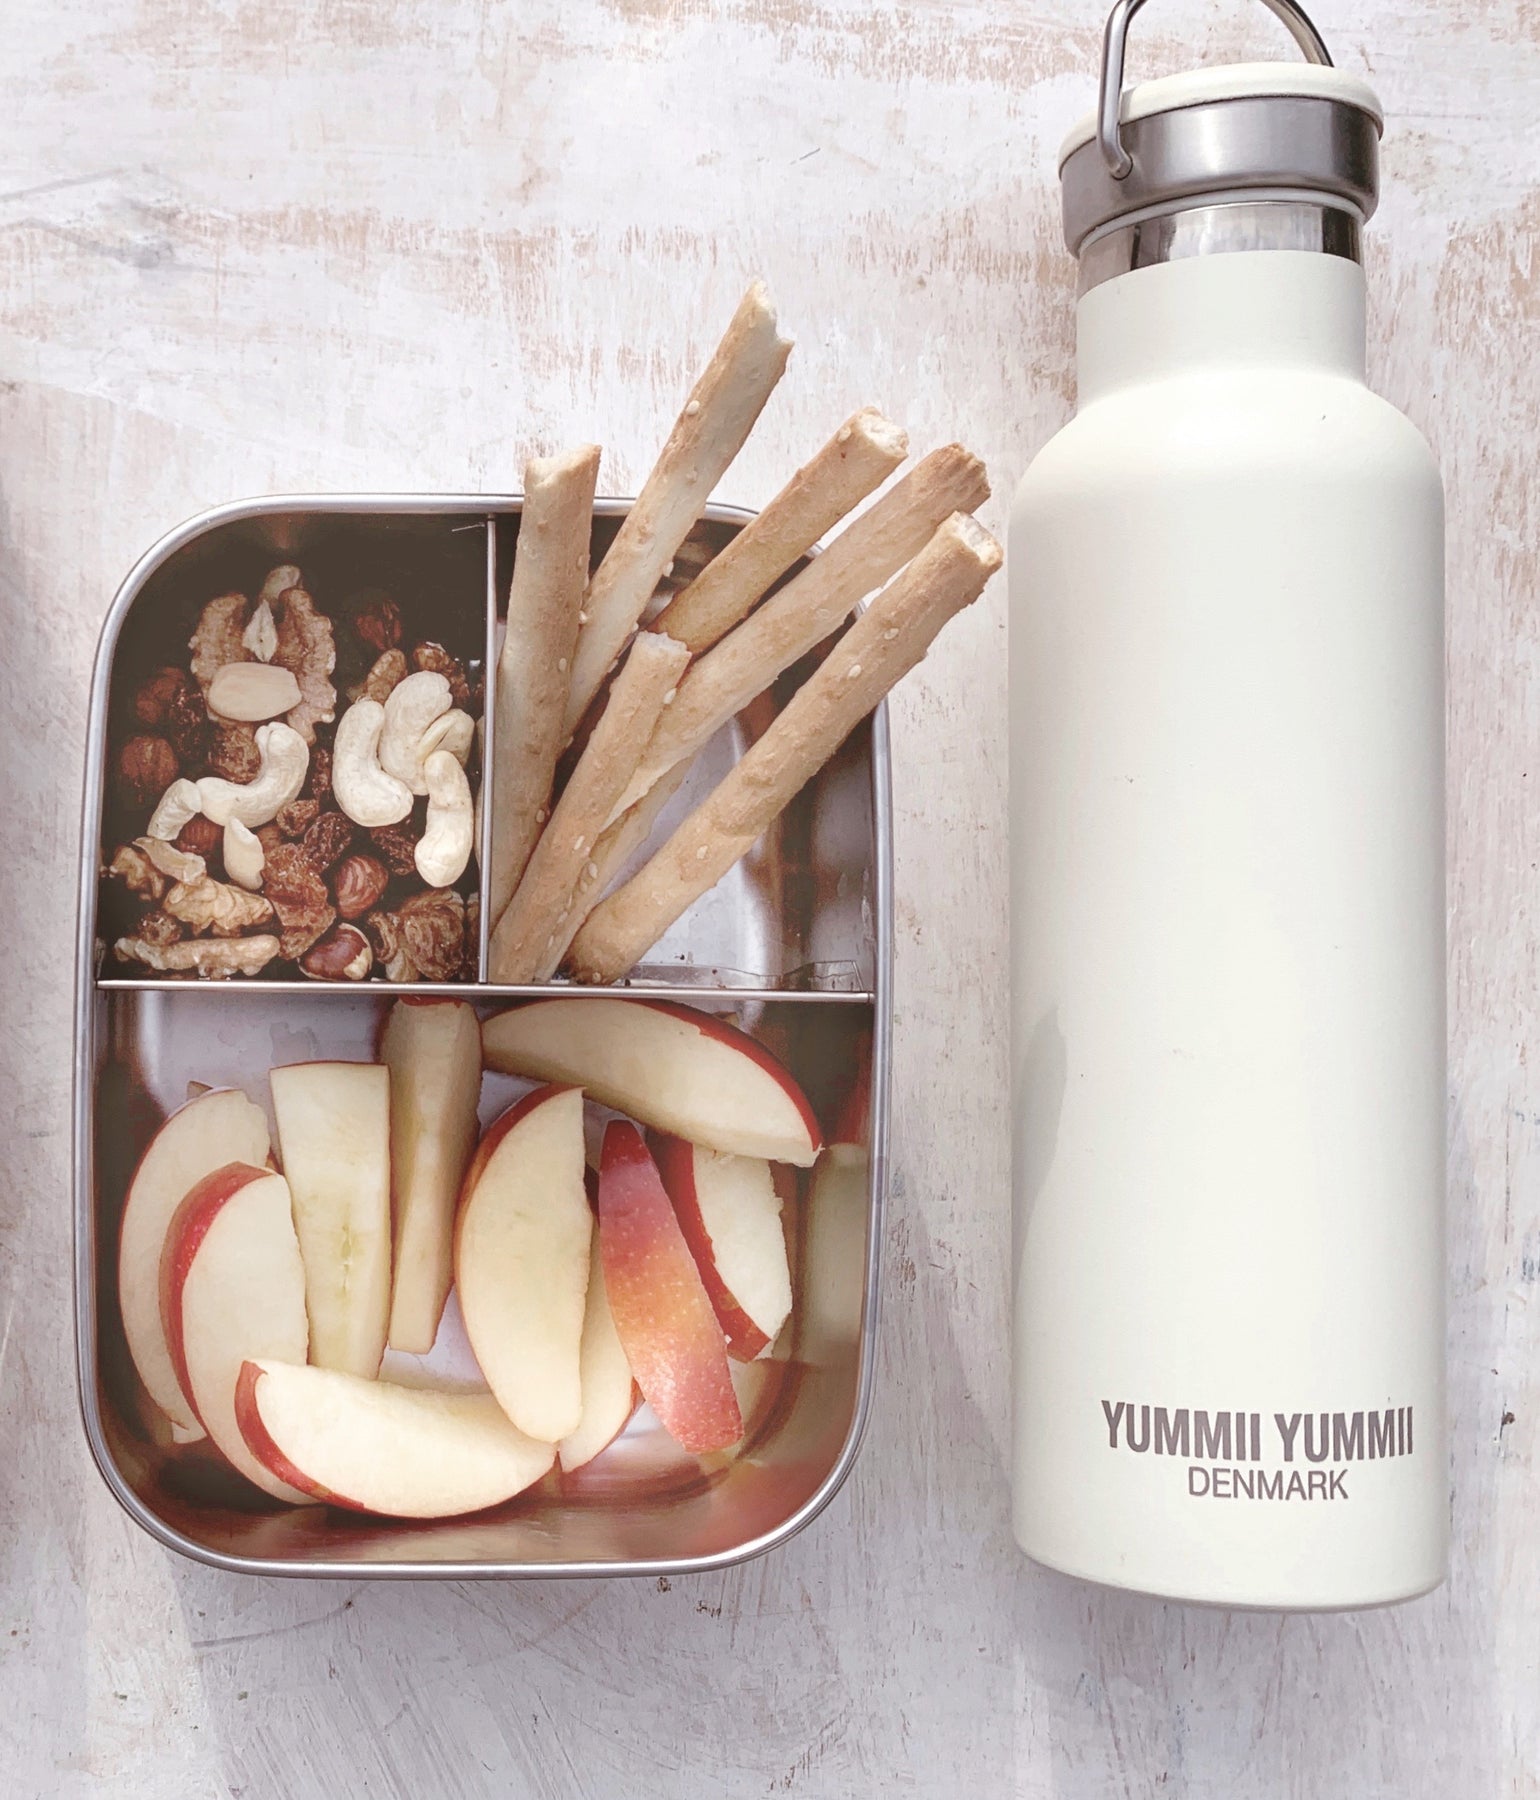 https://cdn.shopify.com/s/files/1/0095/8031/4684/products/Pearl_White_Thermobottle_Medium-Thermo_Bottles-66-Stainless_Steel_18_8-3_1800x1800.jpg?v=1697897669